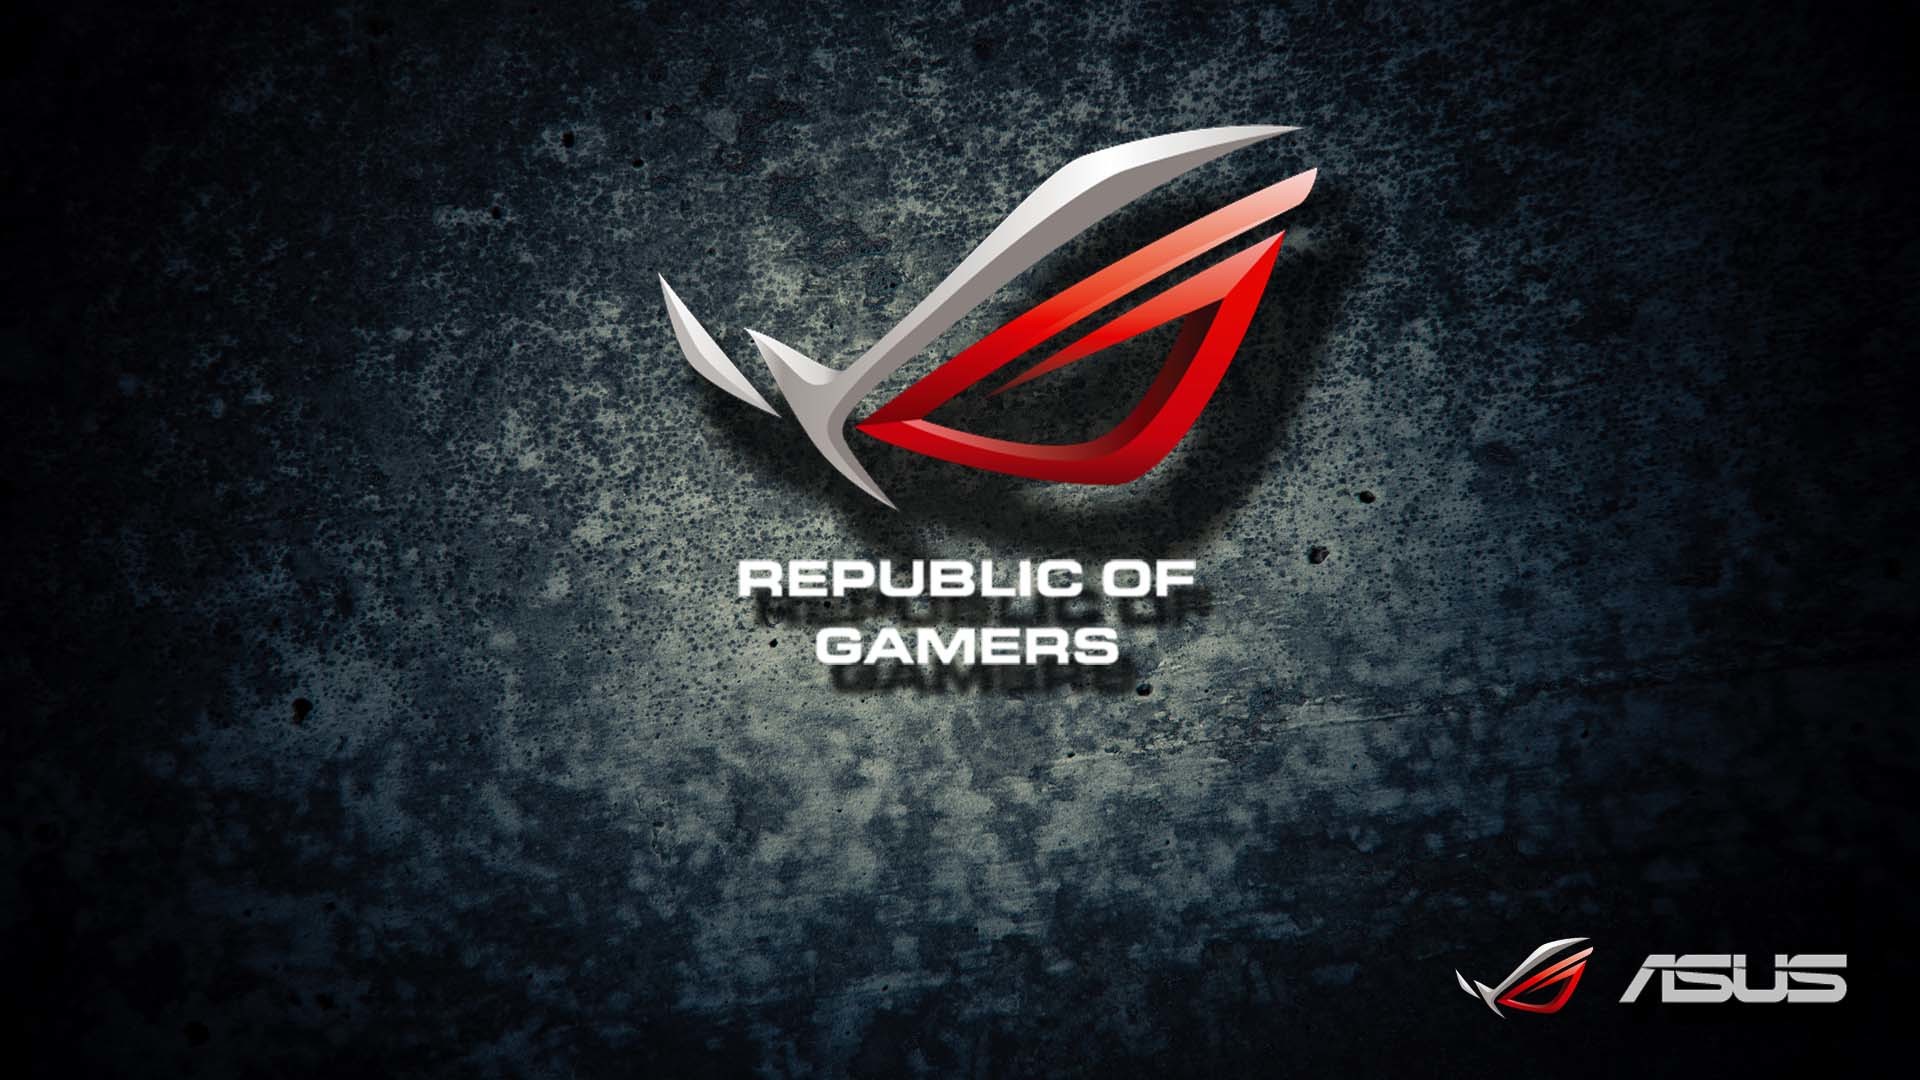 1920x1080 Wallpaper Competition: Vote For Your Favorite - Republic of Gamers